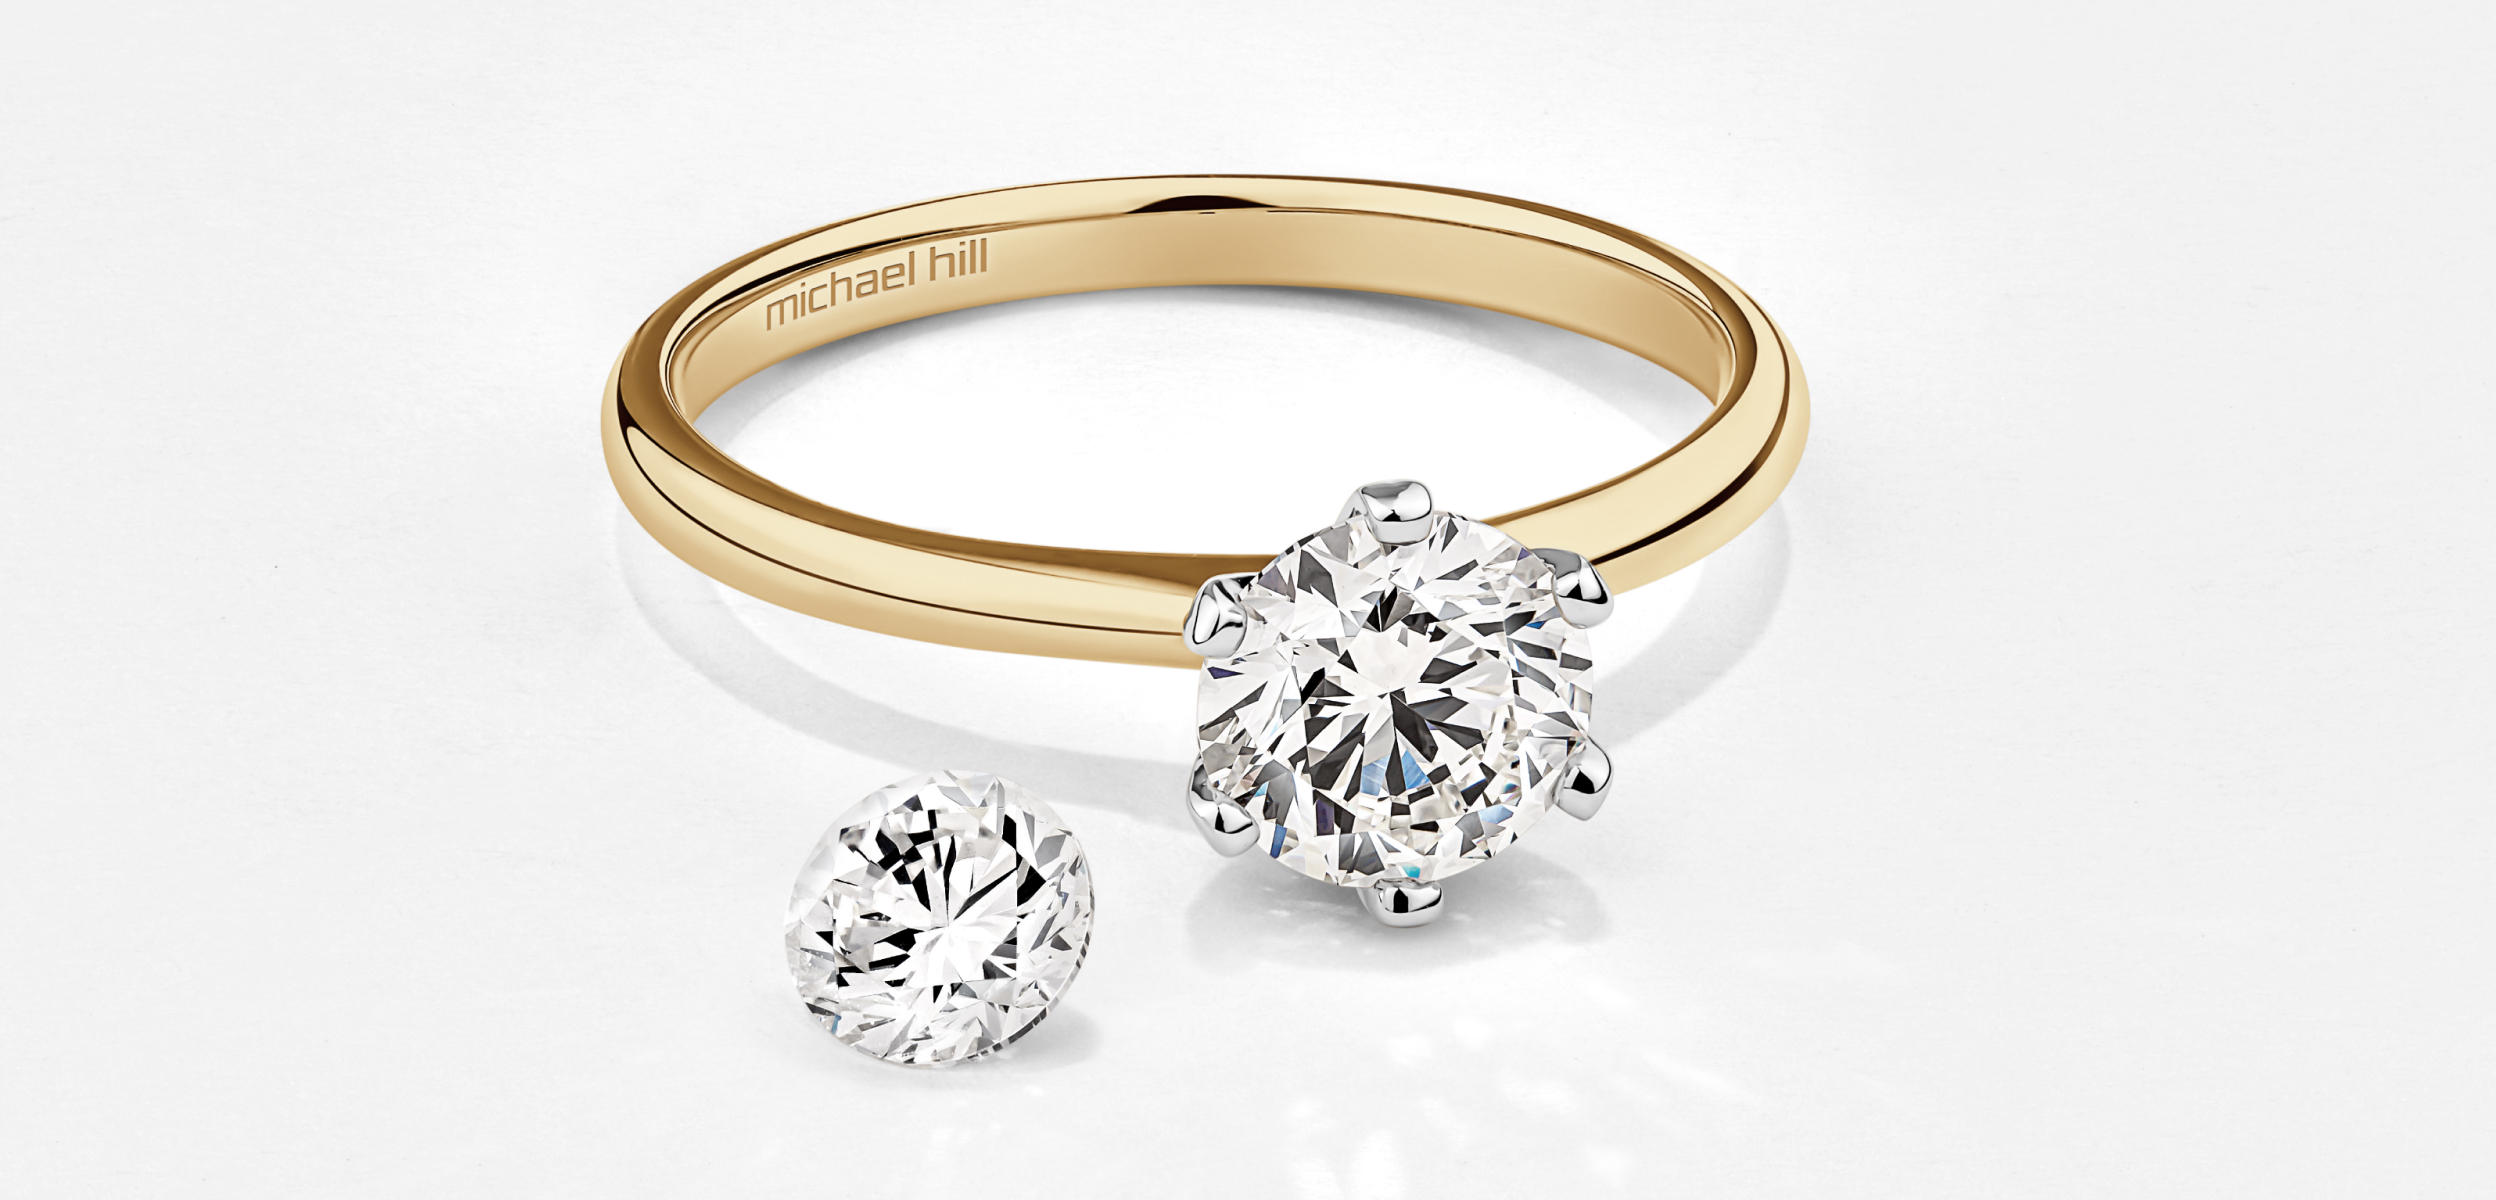 The Solitaire Collection by Michael Hill